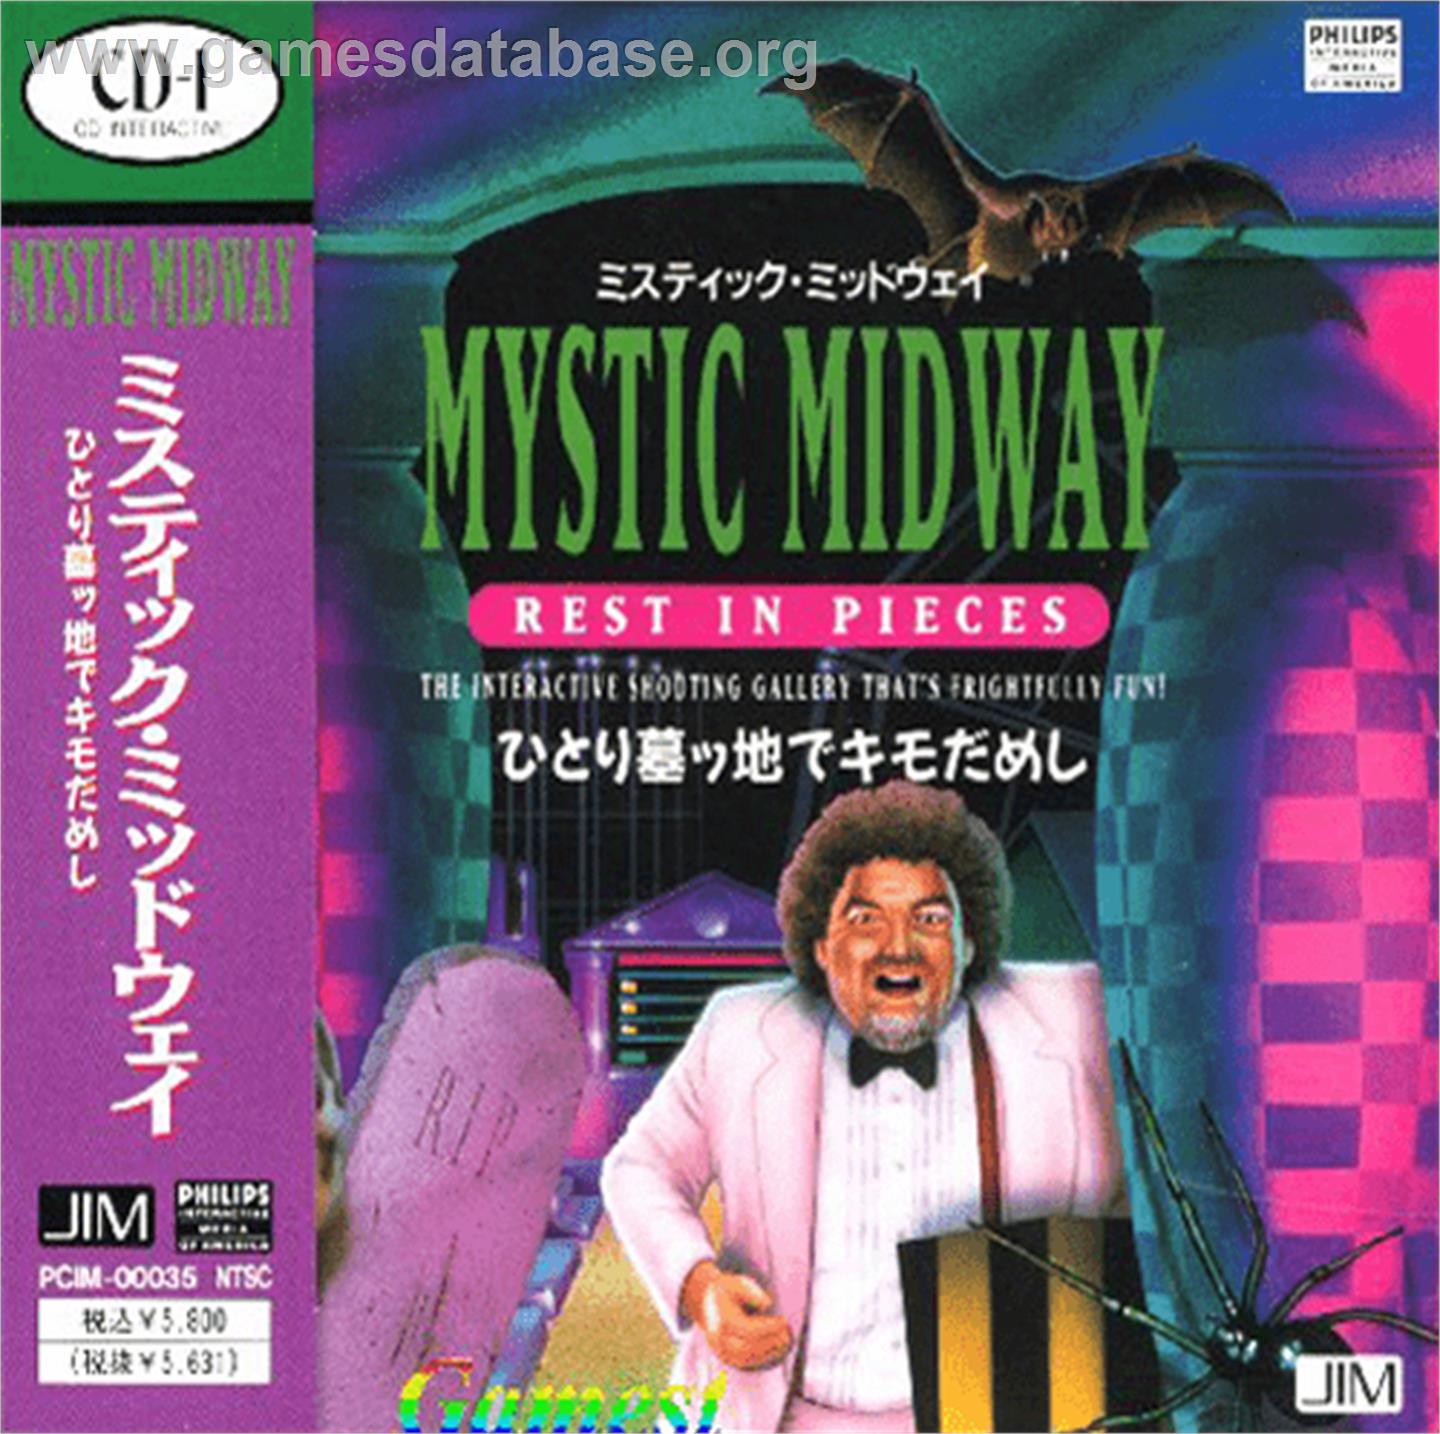 Mystic Midway: Rest in Pieces - Philips CD-i - Artwork - Box